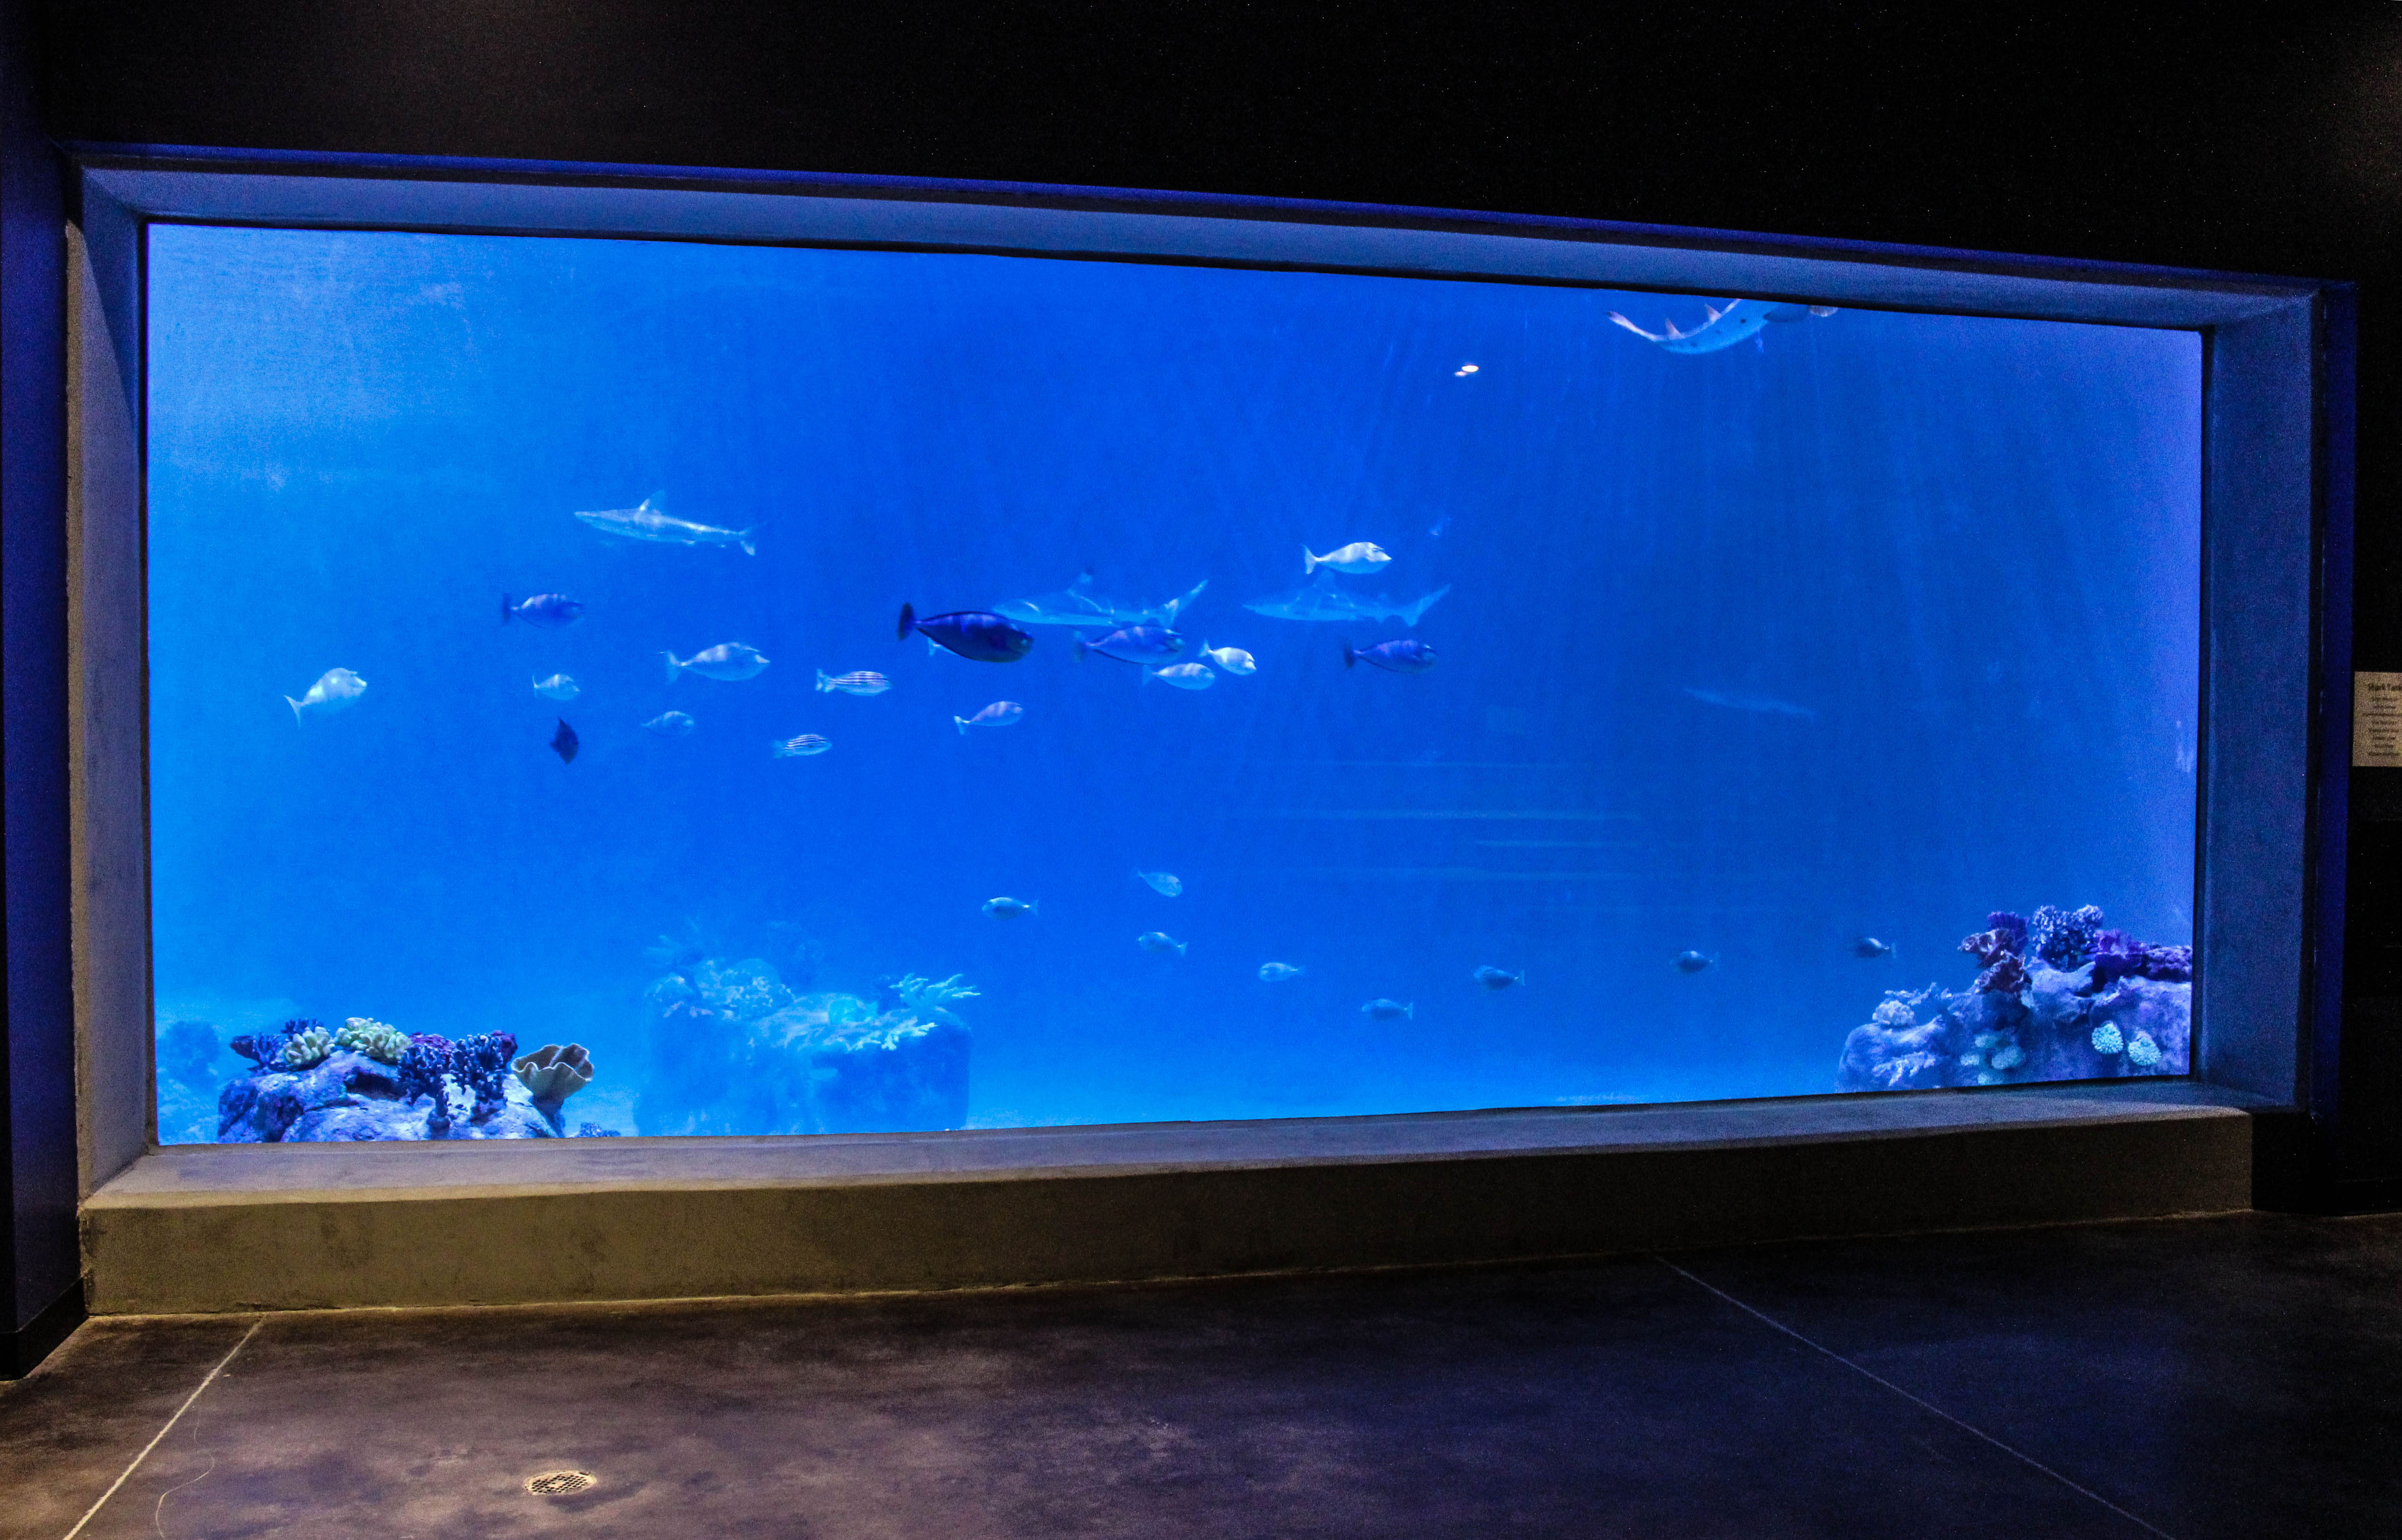 This 20' x 9' R-Cast® acrylic panel is only 5" thick but is able to hold back 300,000 gallons of water - and the sharks that call the tank home.